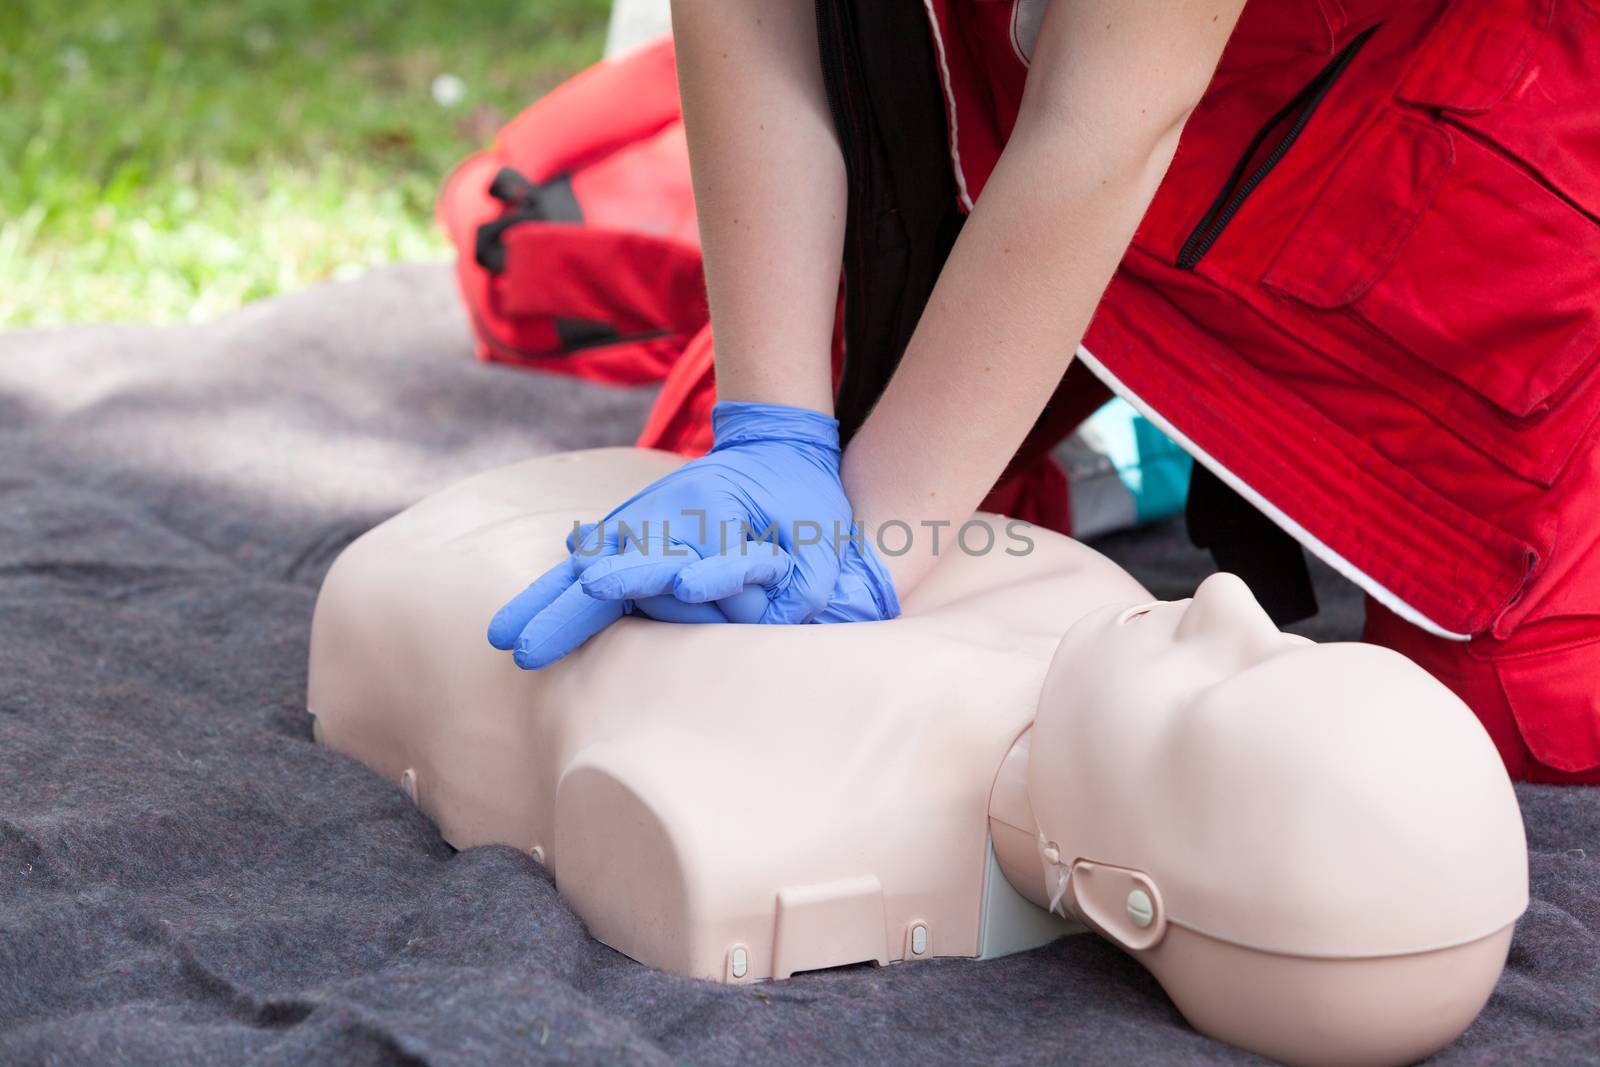 First aid training. Instructor showing CPR on training doll.